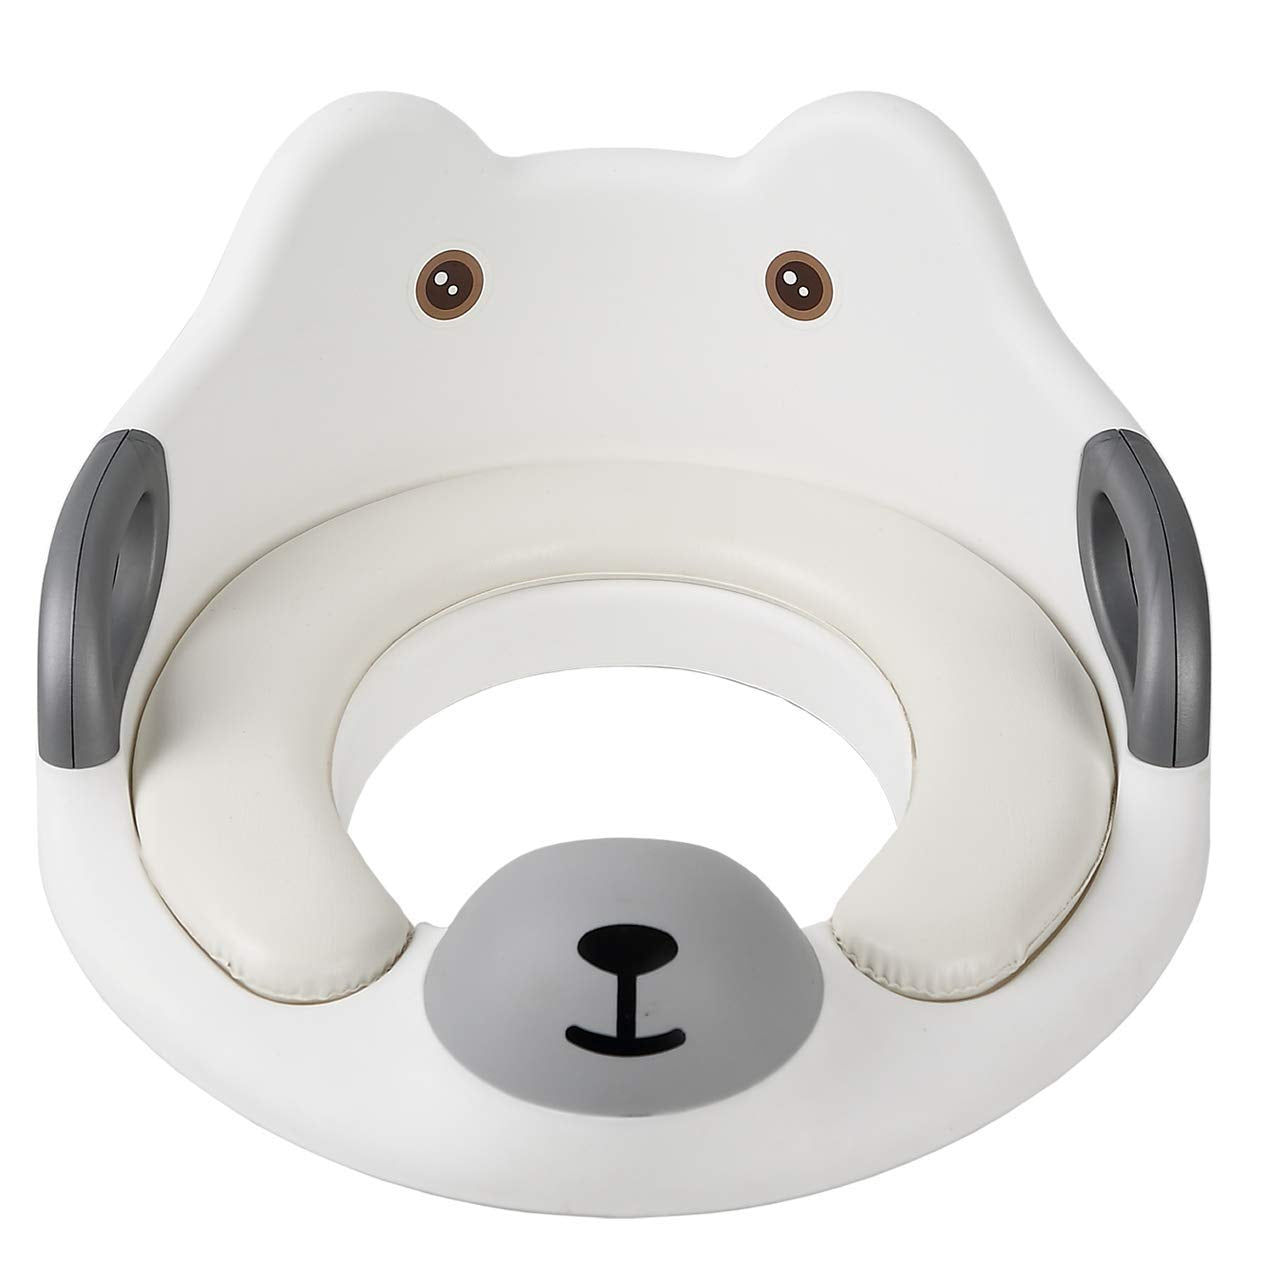 Toddler Toilet Seat - Potty Training Seat for Kids, Toilet Trainer Ring for Boys or Girls (White)